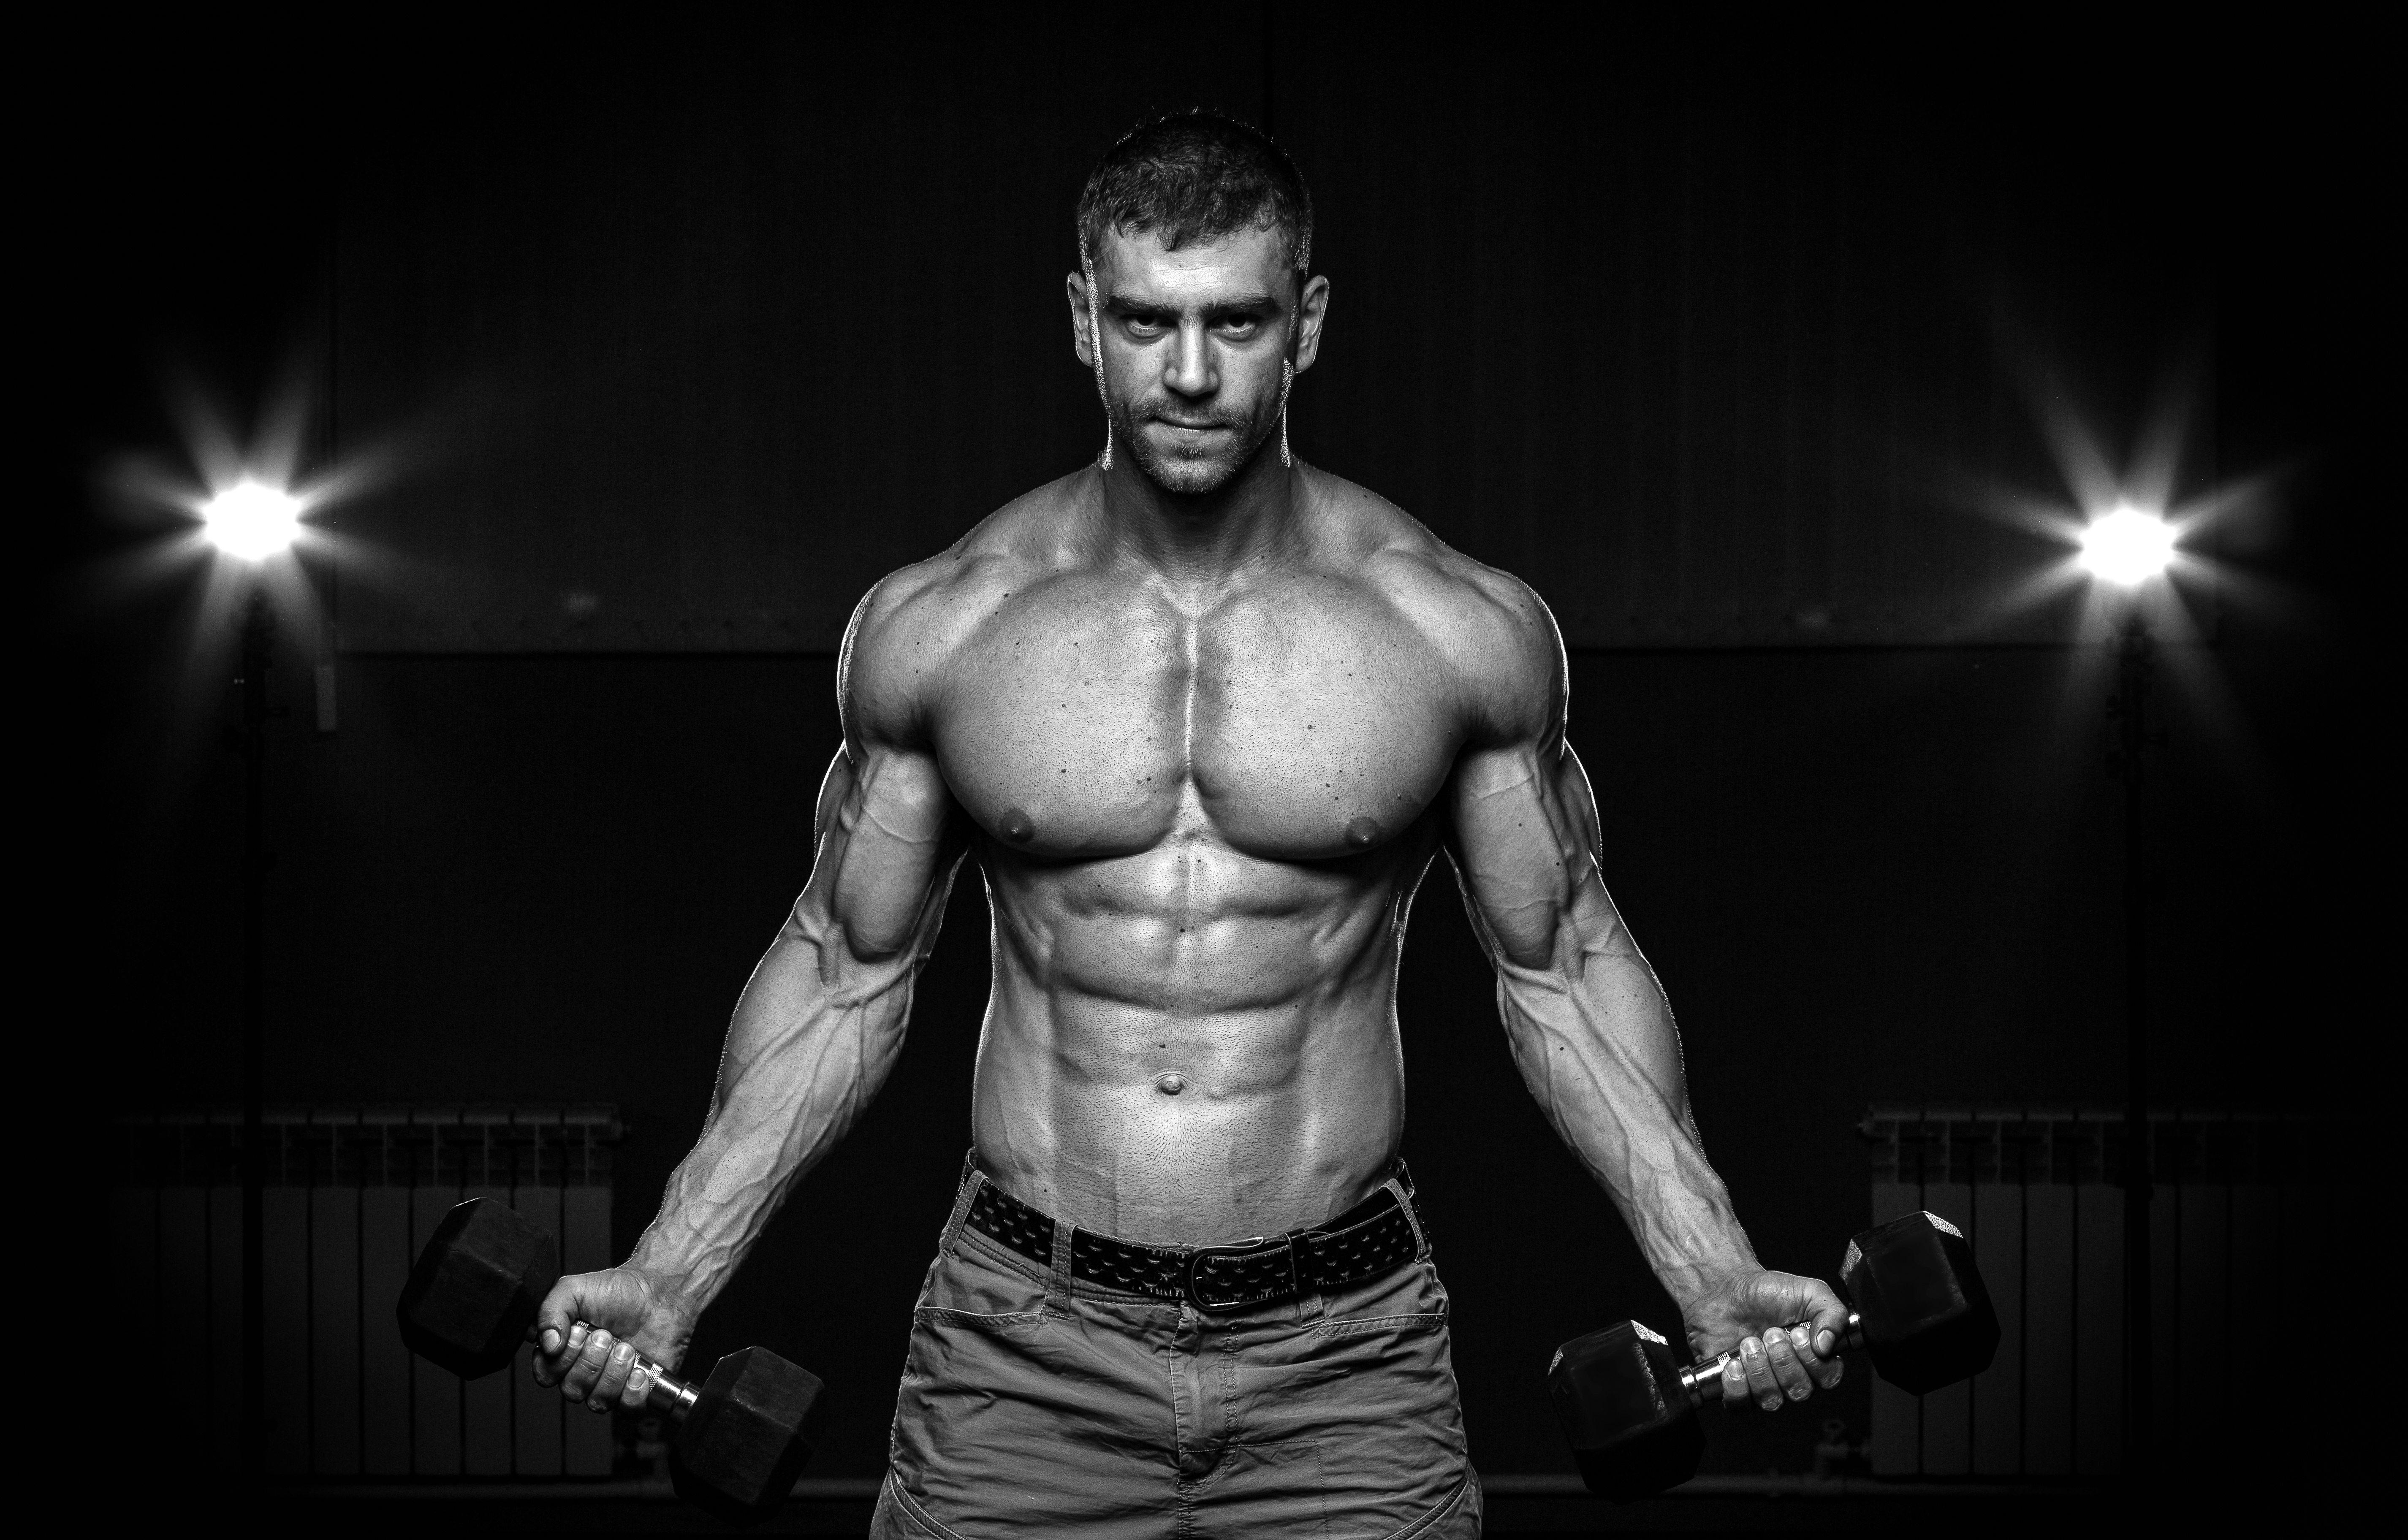 weightlifting, sports, black & white, model, muscle